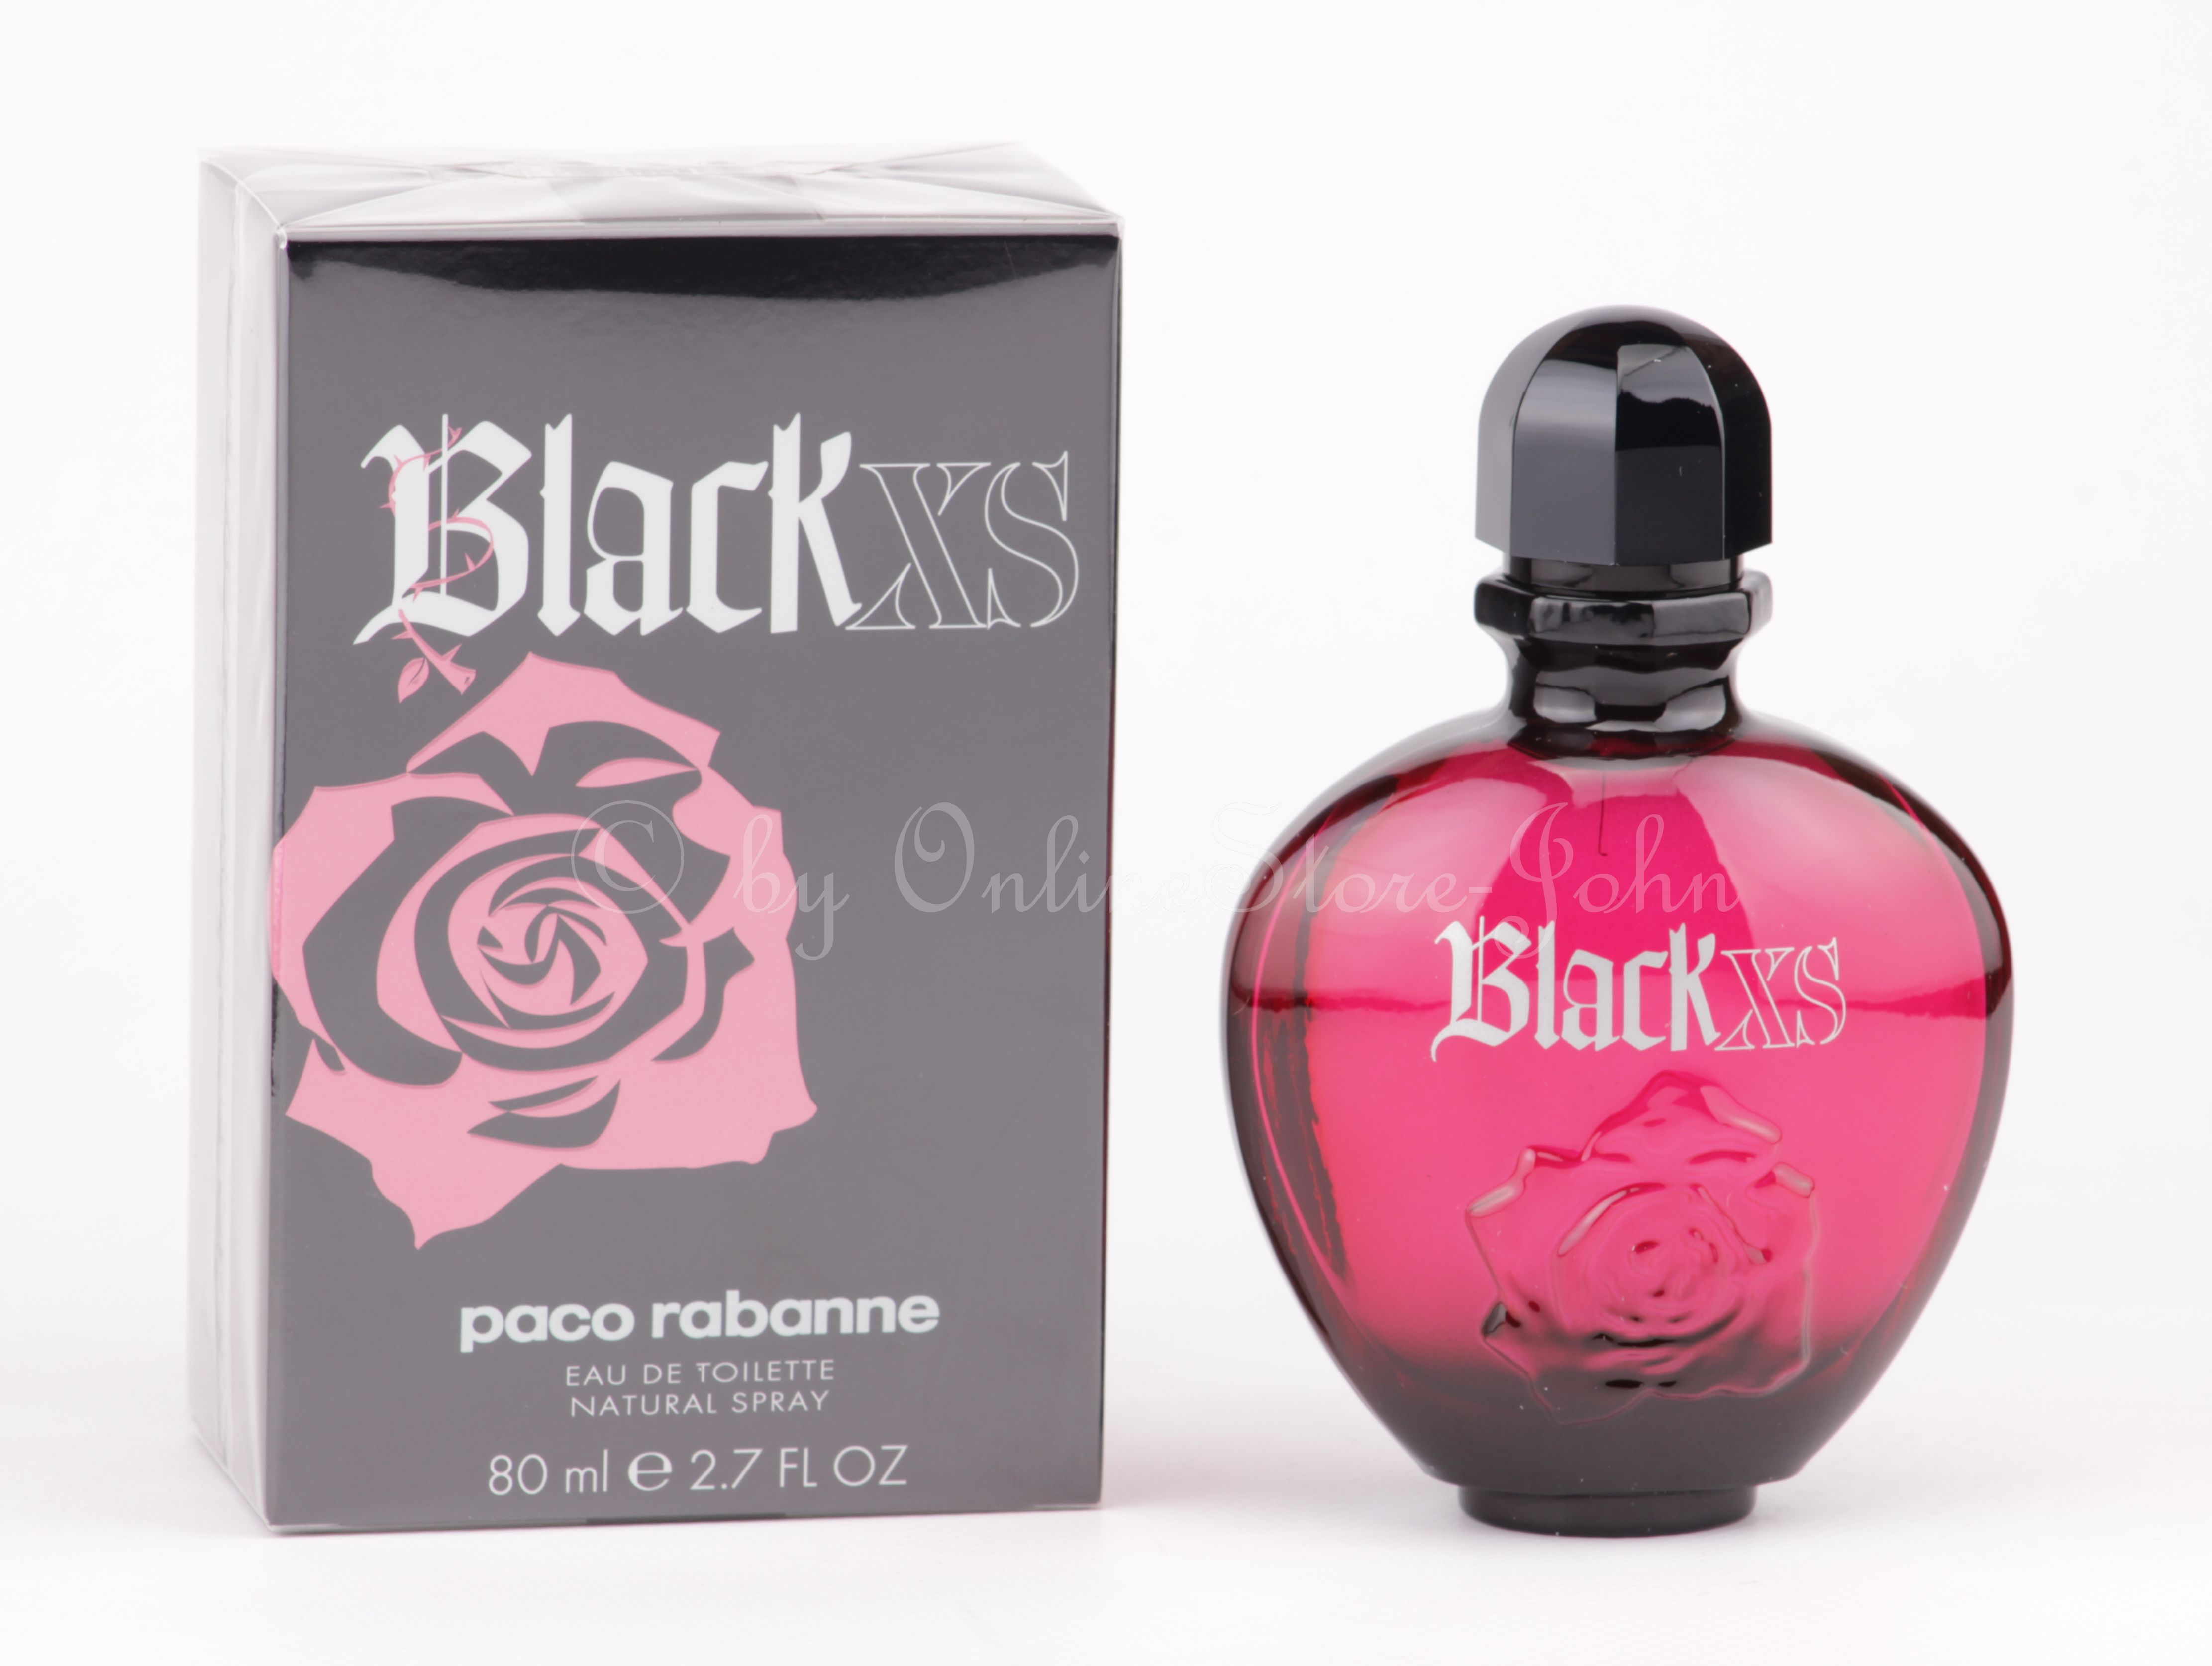 Paco Rabanne Black XS for her. Paco Rabanne Black XS женский. Paco Rabanne Black XS L'exces for her 50 ml. Paco Rabanne Black XS женский набор.